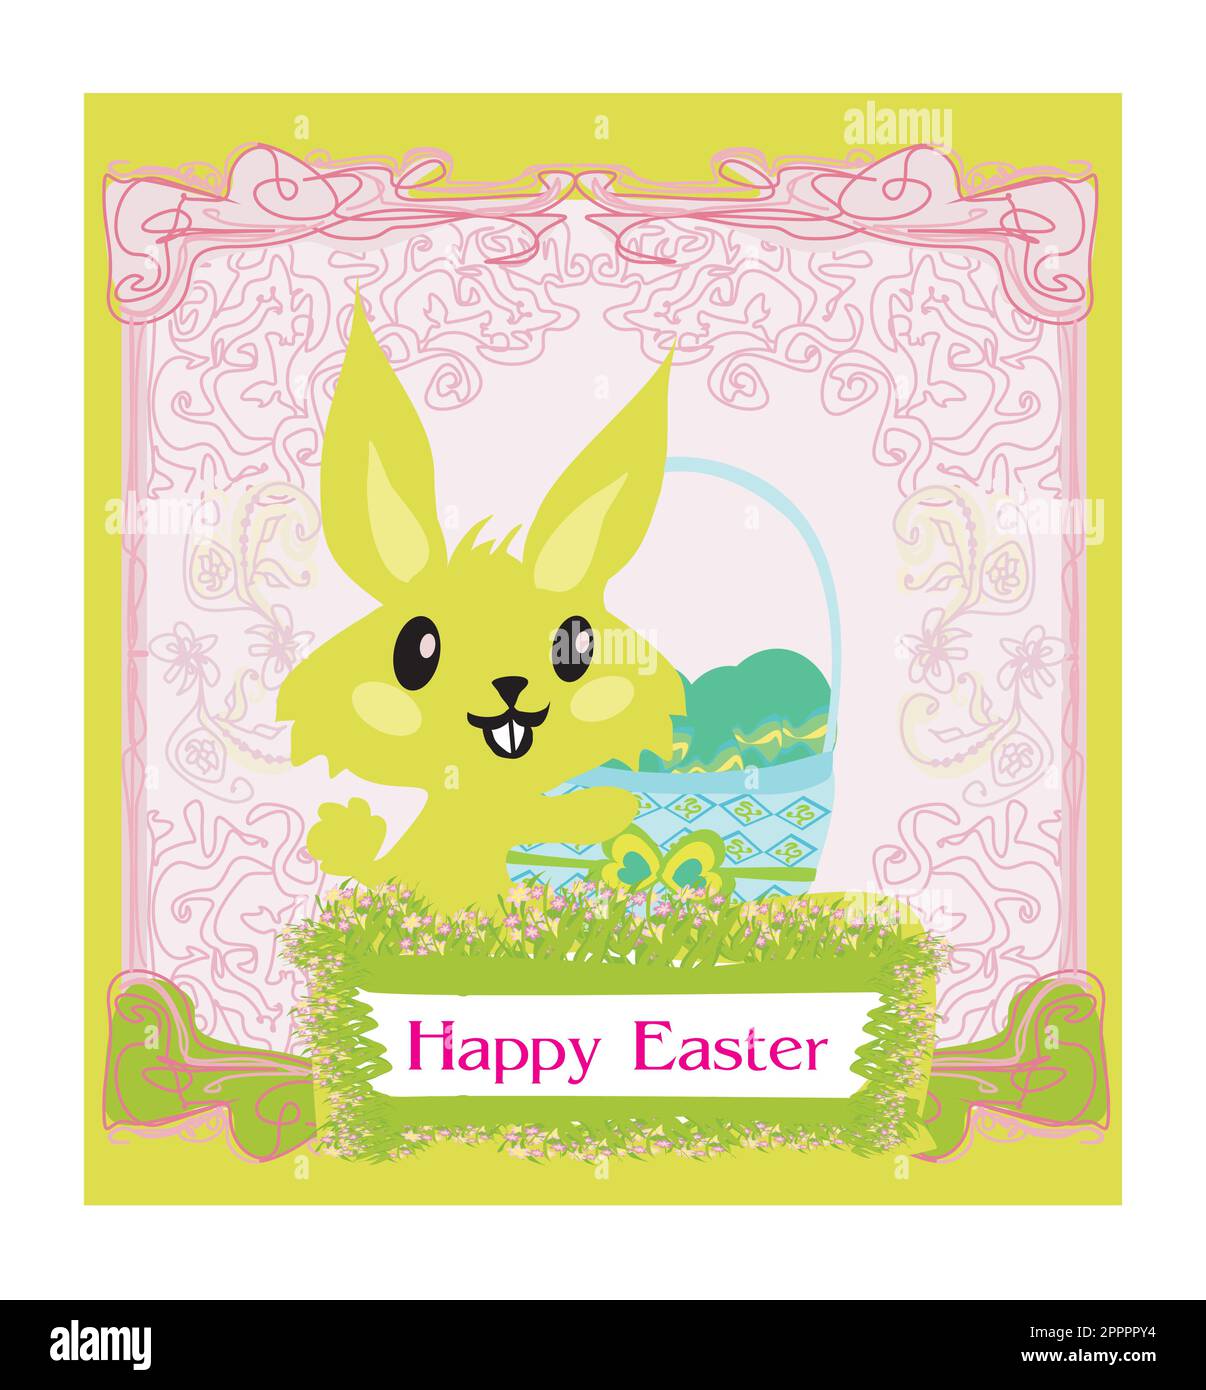 Illustration of happy Easter bunny carrying egg Stock Vector